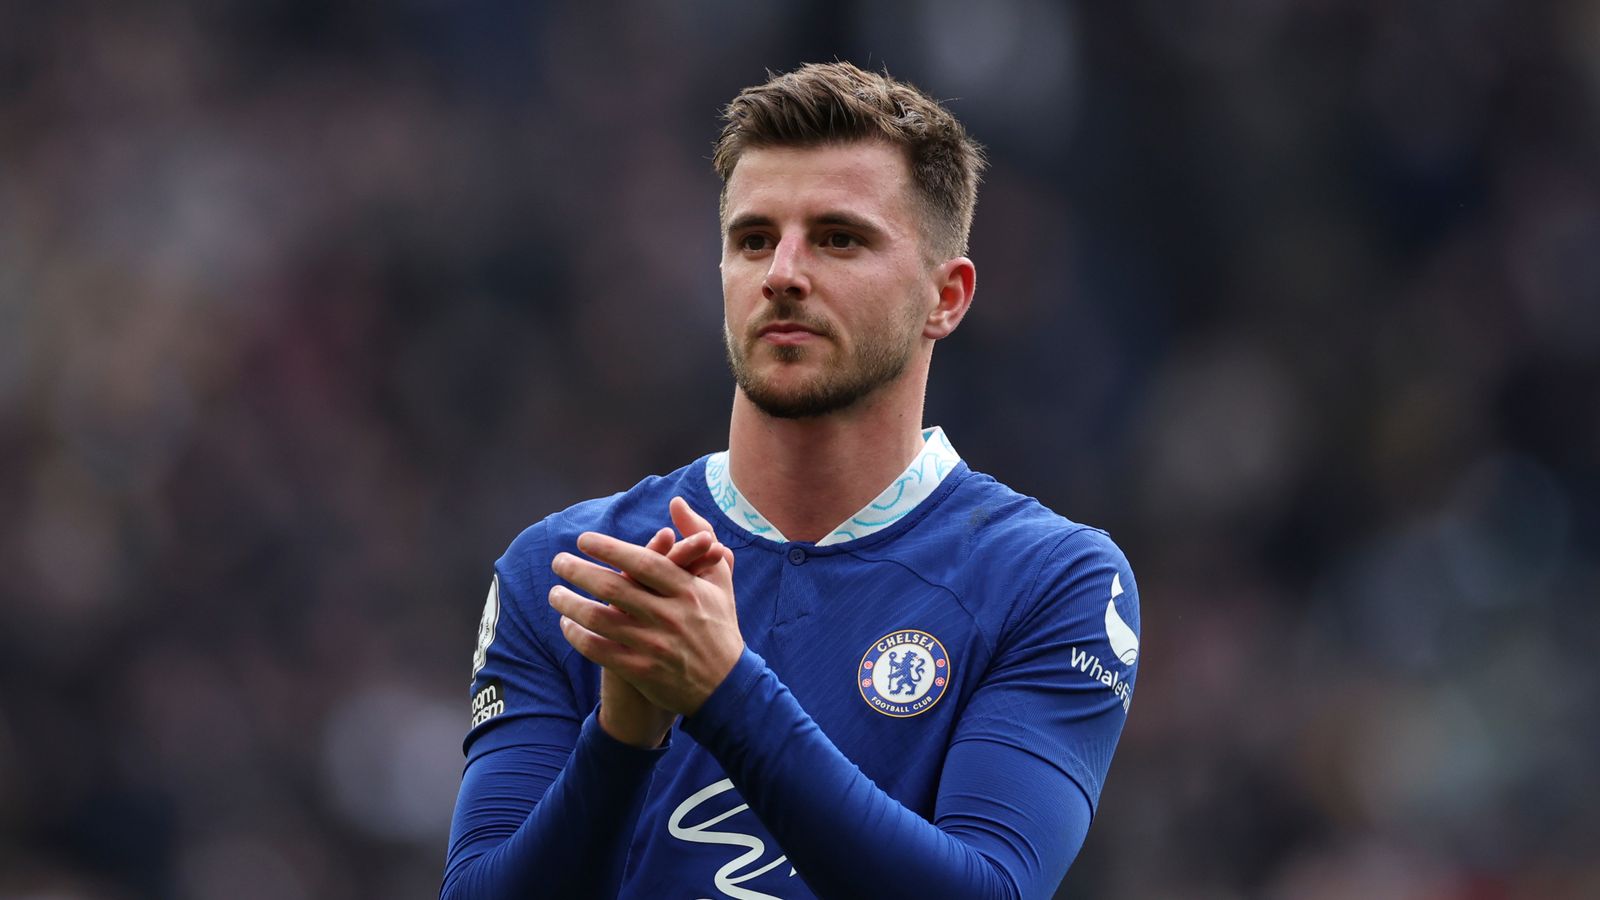 mason-mount-manchester-united-to-approach-chelsea-over-transfer-deal-this-week